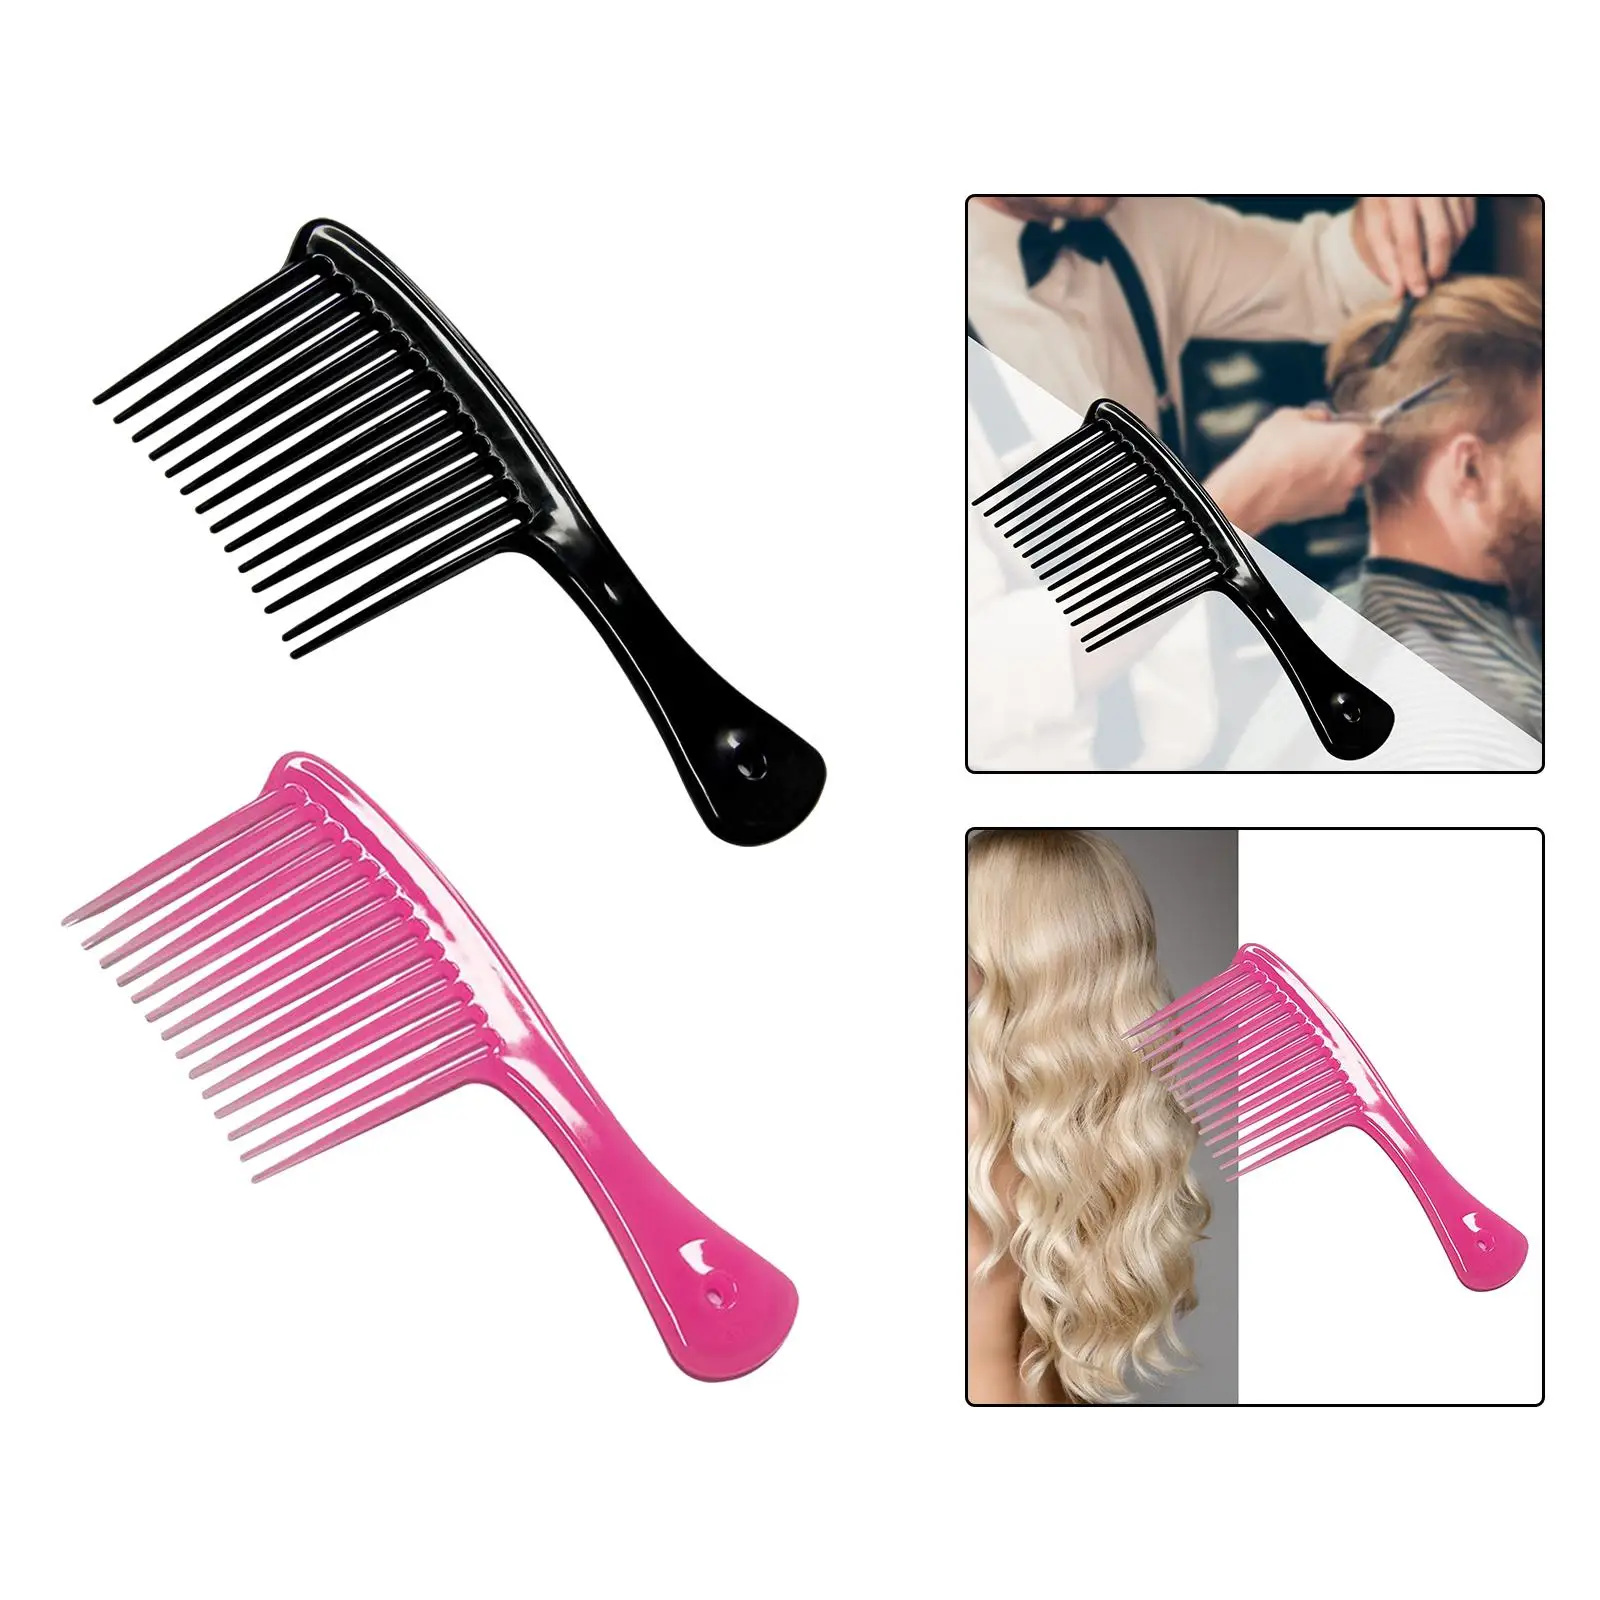 Comb Durable Styling Comb Large Handle Portable Lightweight Hair Styling Tool for Thick Long Hair Curly Hair Home Salon